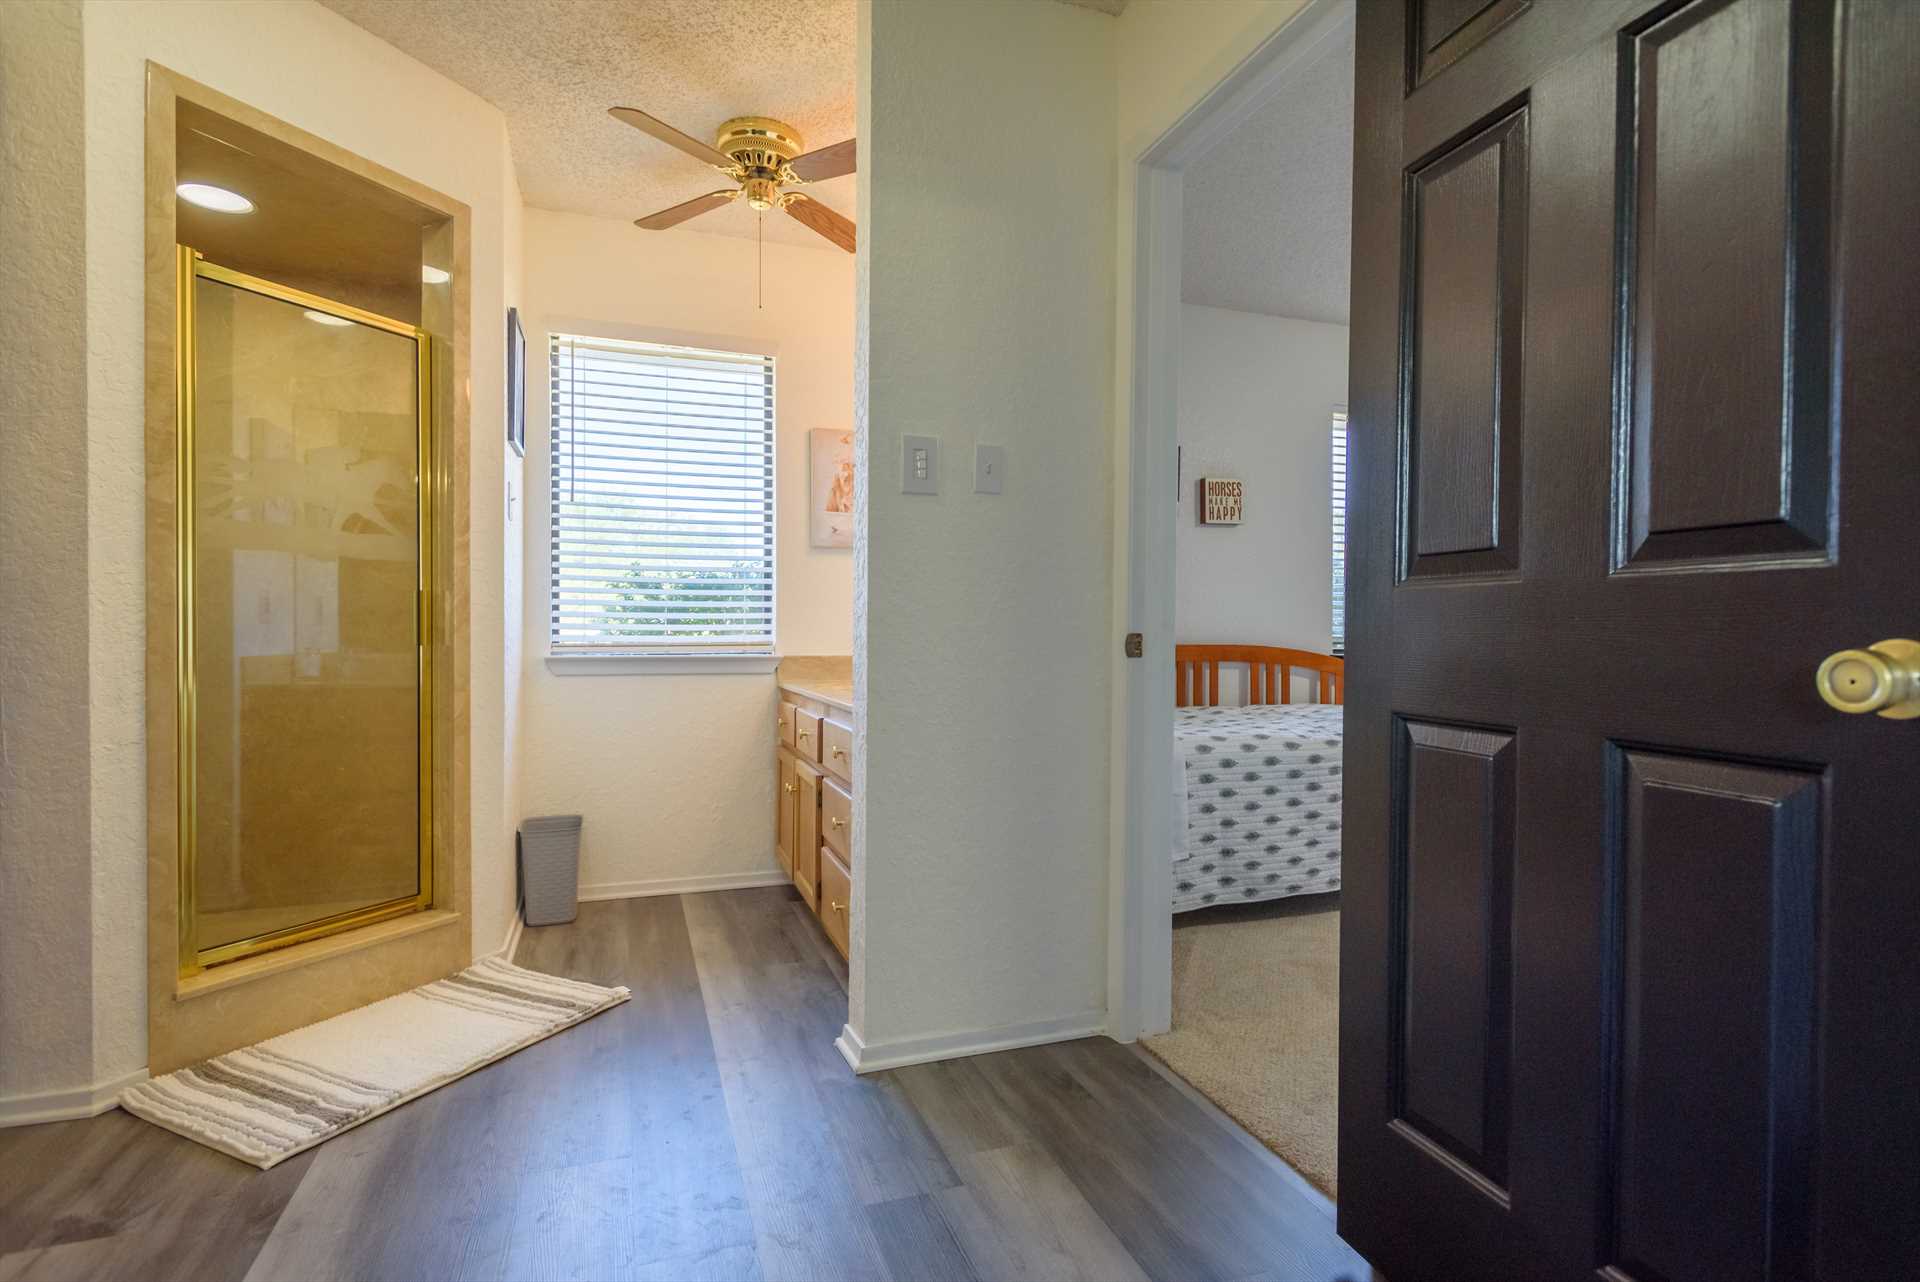                                                 The centerpiece of the second bath is a spotlessly clean and roomy shower stall!